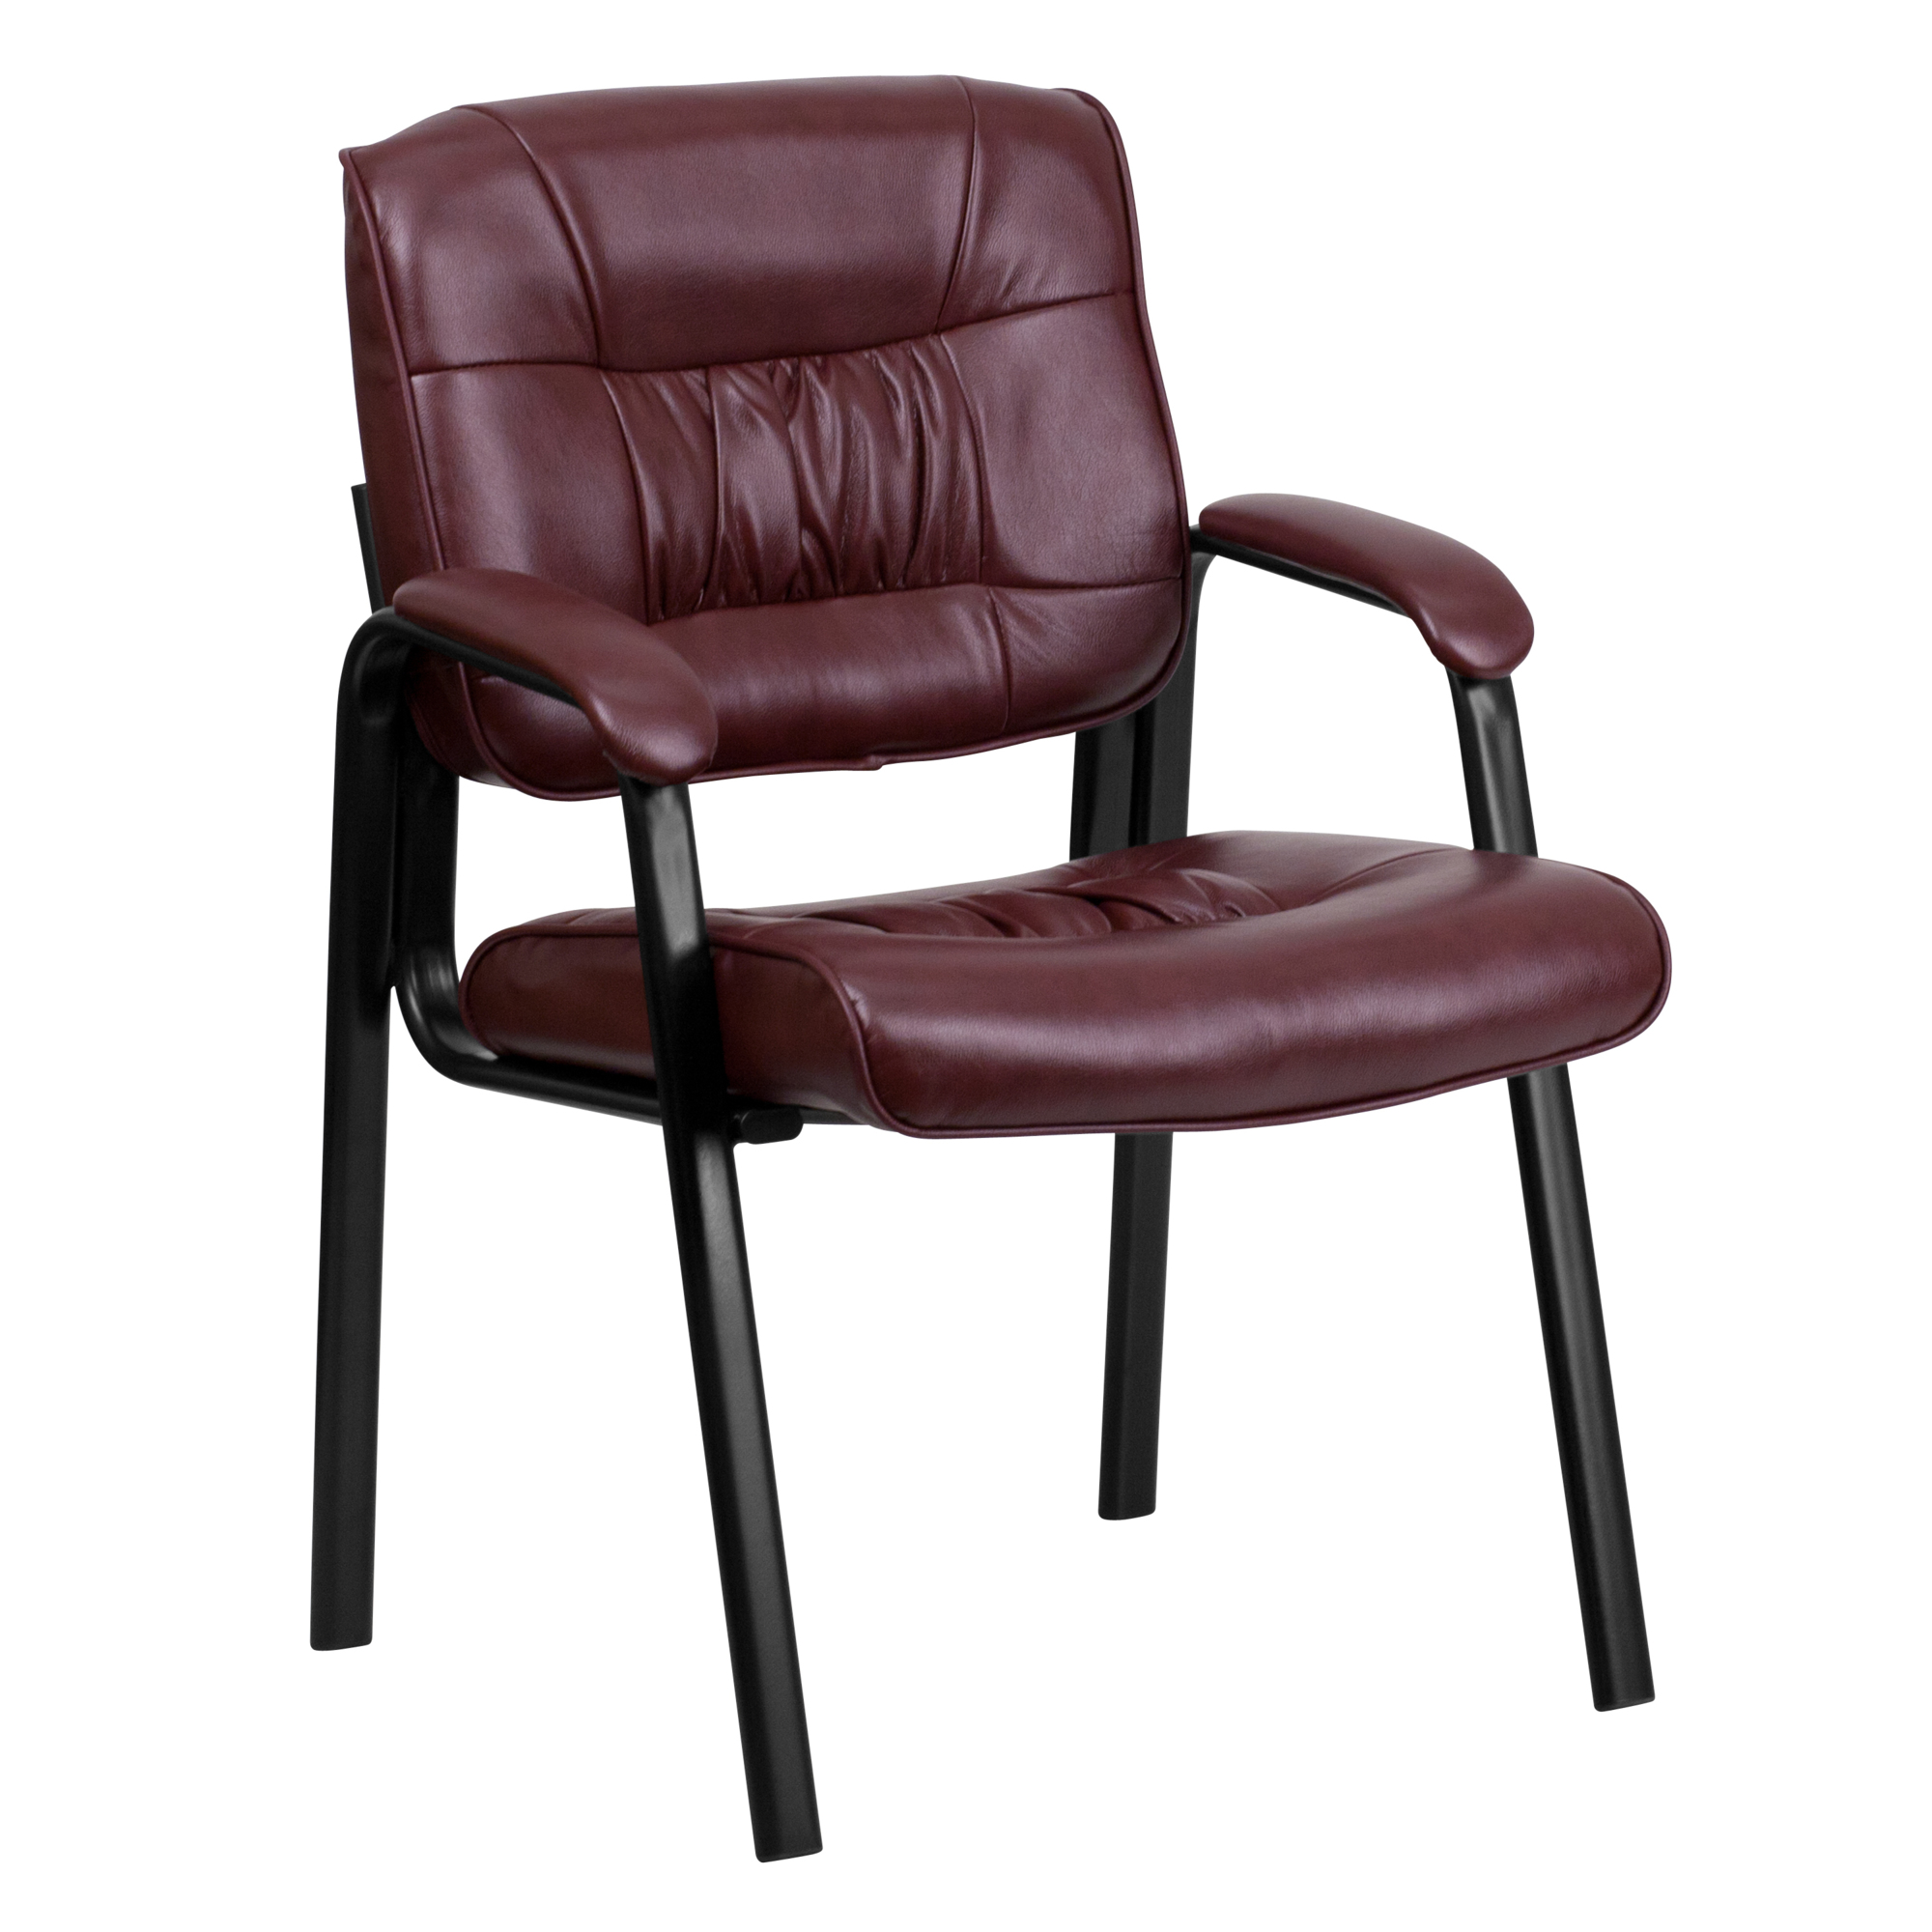 Flash Furniture, Burgundy LeatherSoft Chair with Black Metal Frame, Primary Color Burgundy, Included (qty.) 1, Model BT1404BURG